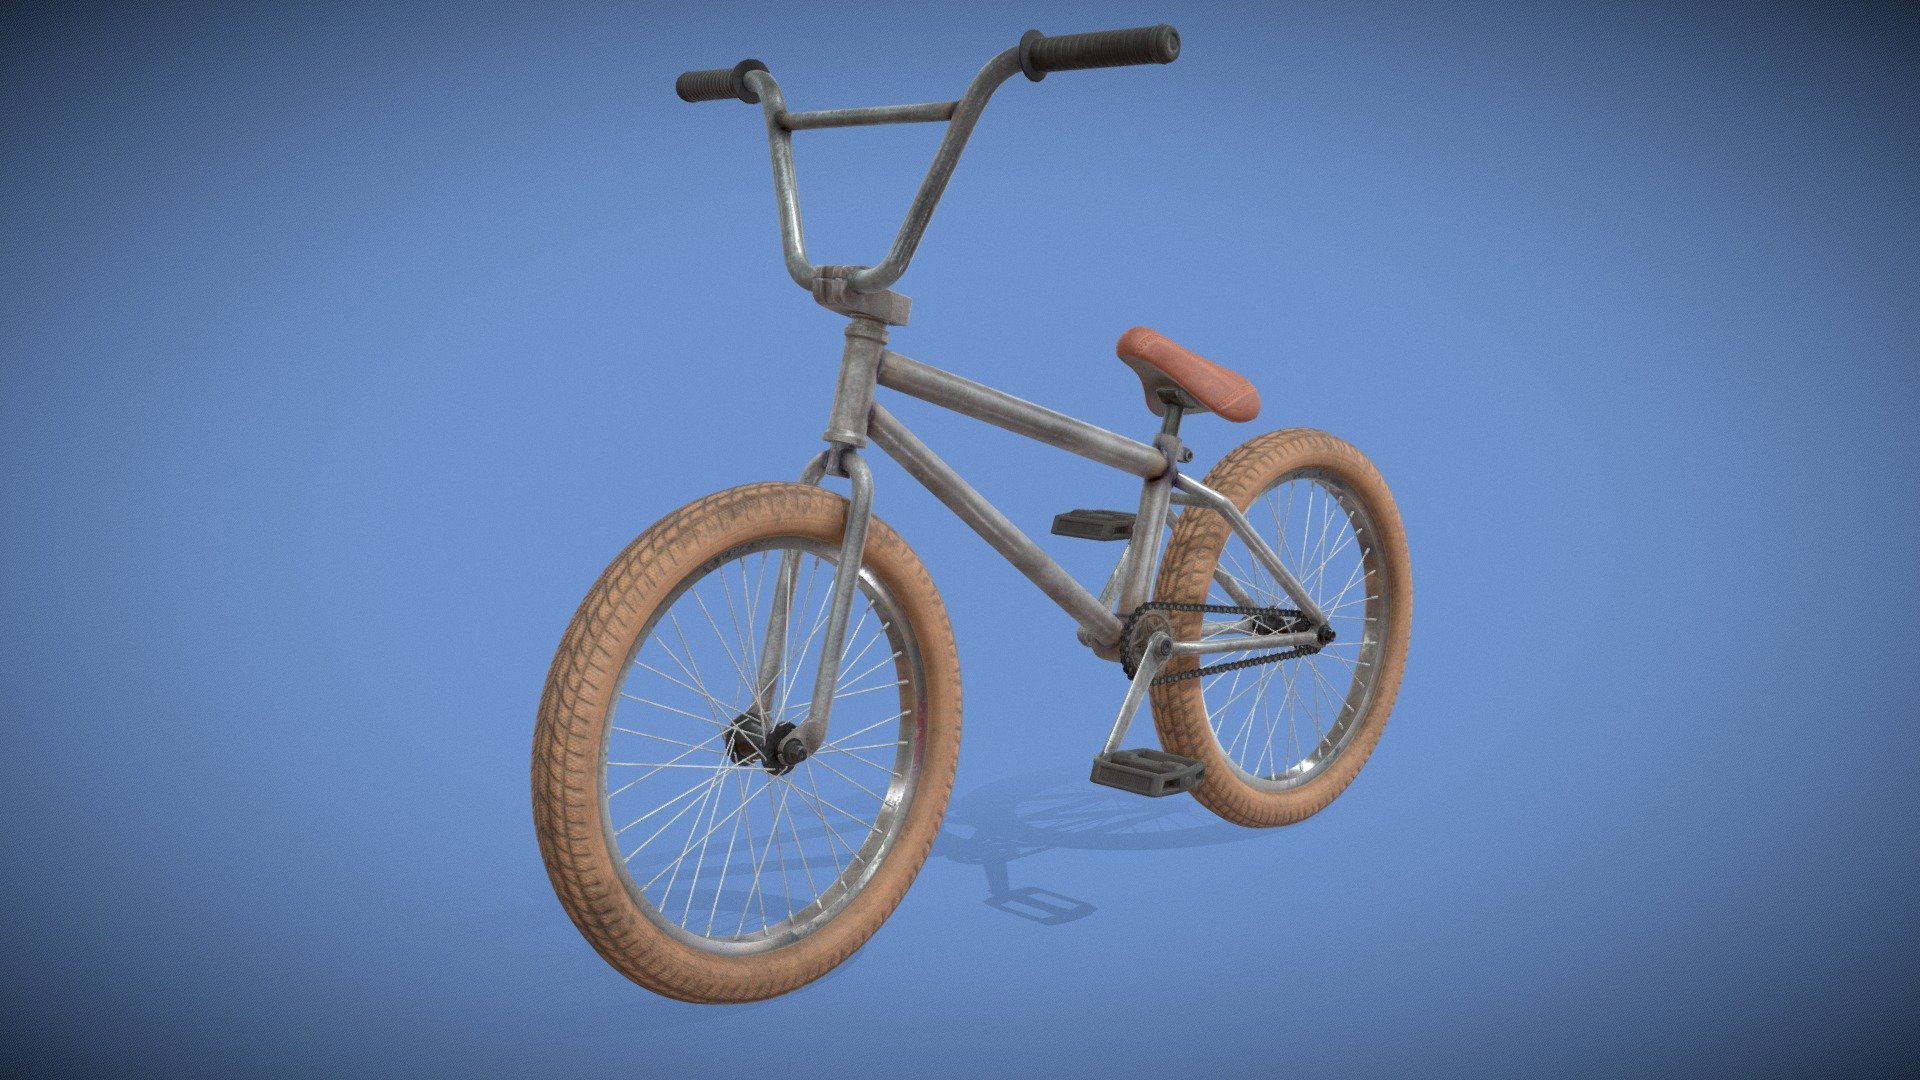 GRAY BMX BIKE with Brown Leather Seat (ANIMATED)